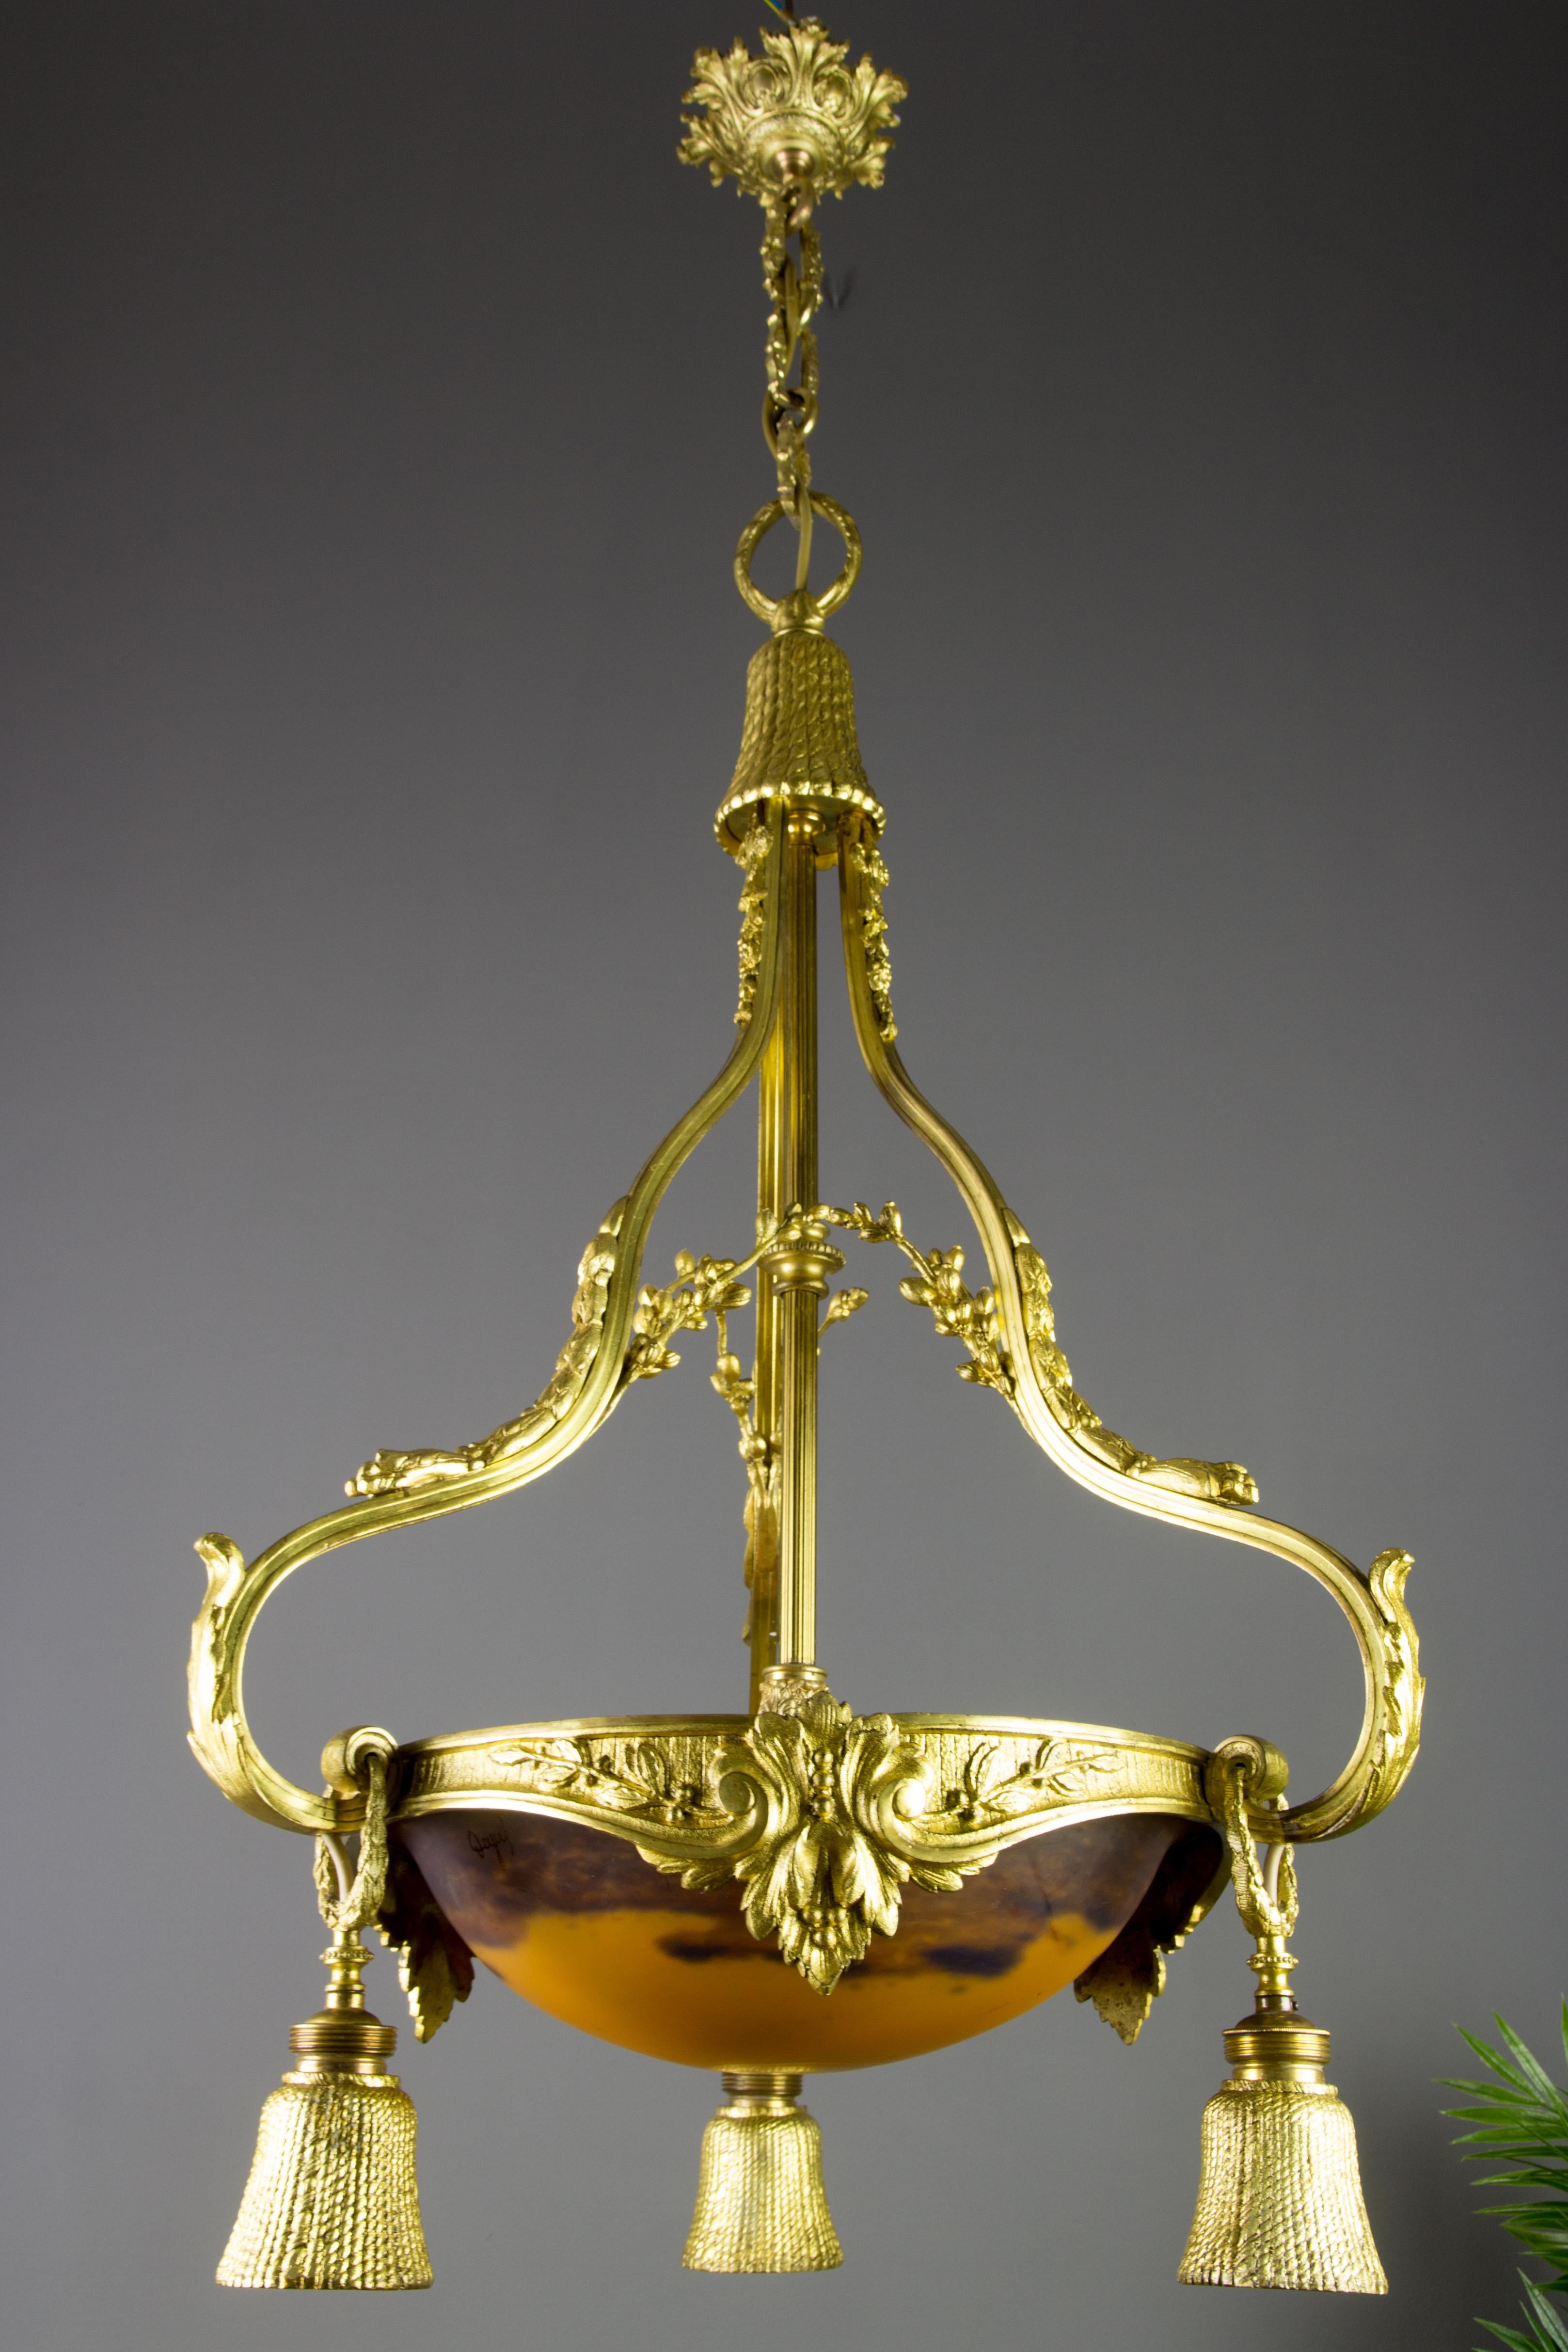 French Louis XVI style gilt bronze four-light chandelier with glass by Degué 
French Louis XVI style ornate gilt bronze four-light chandelier, decorated with acanthus leaves and branches. This antique chandelier features three bronze light socket